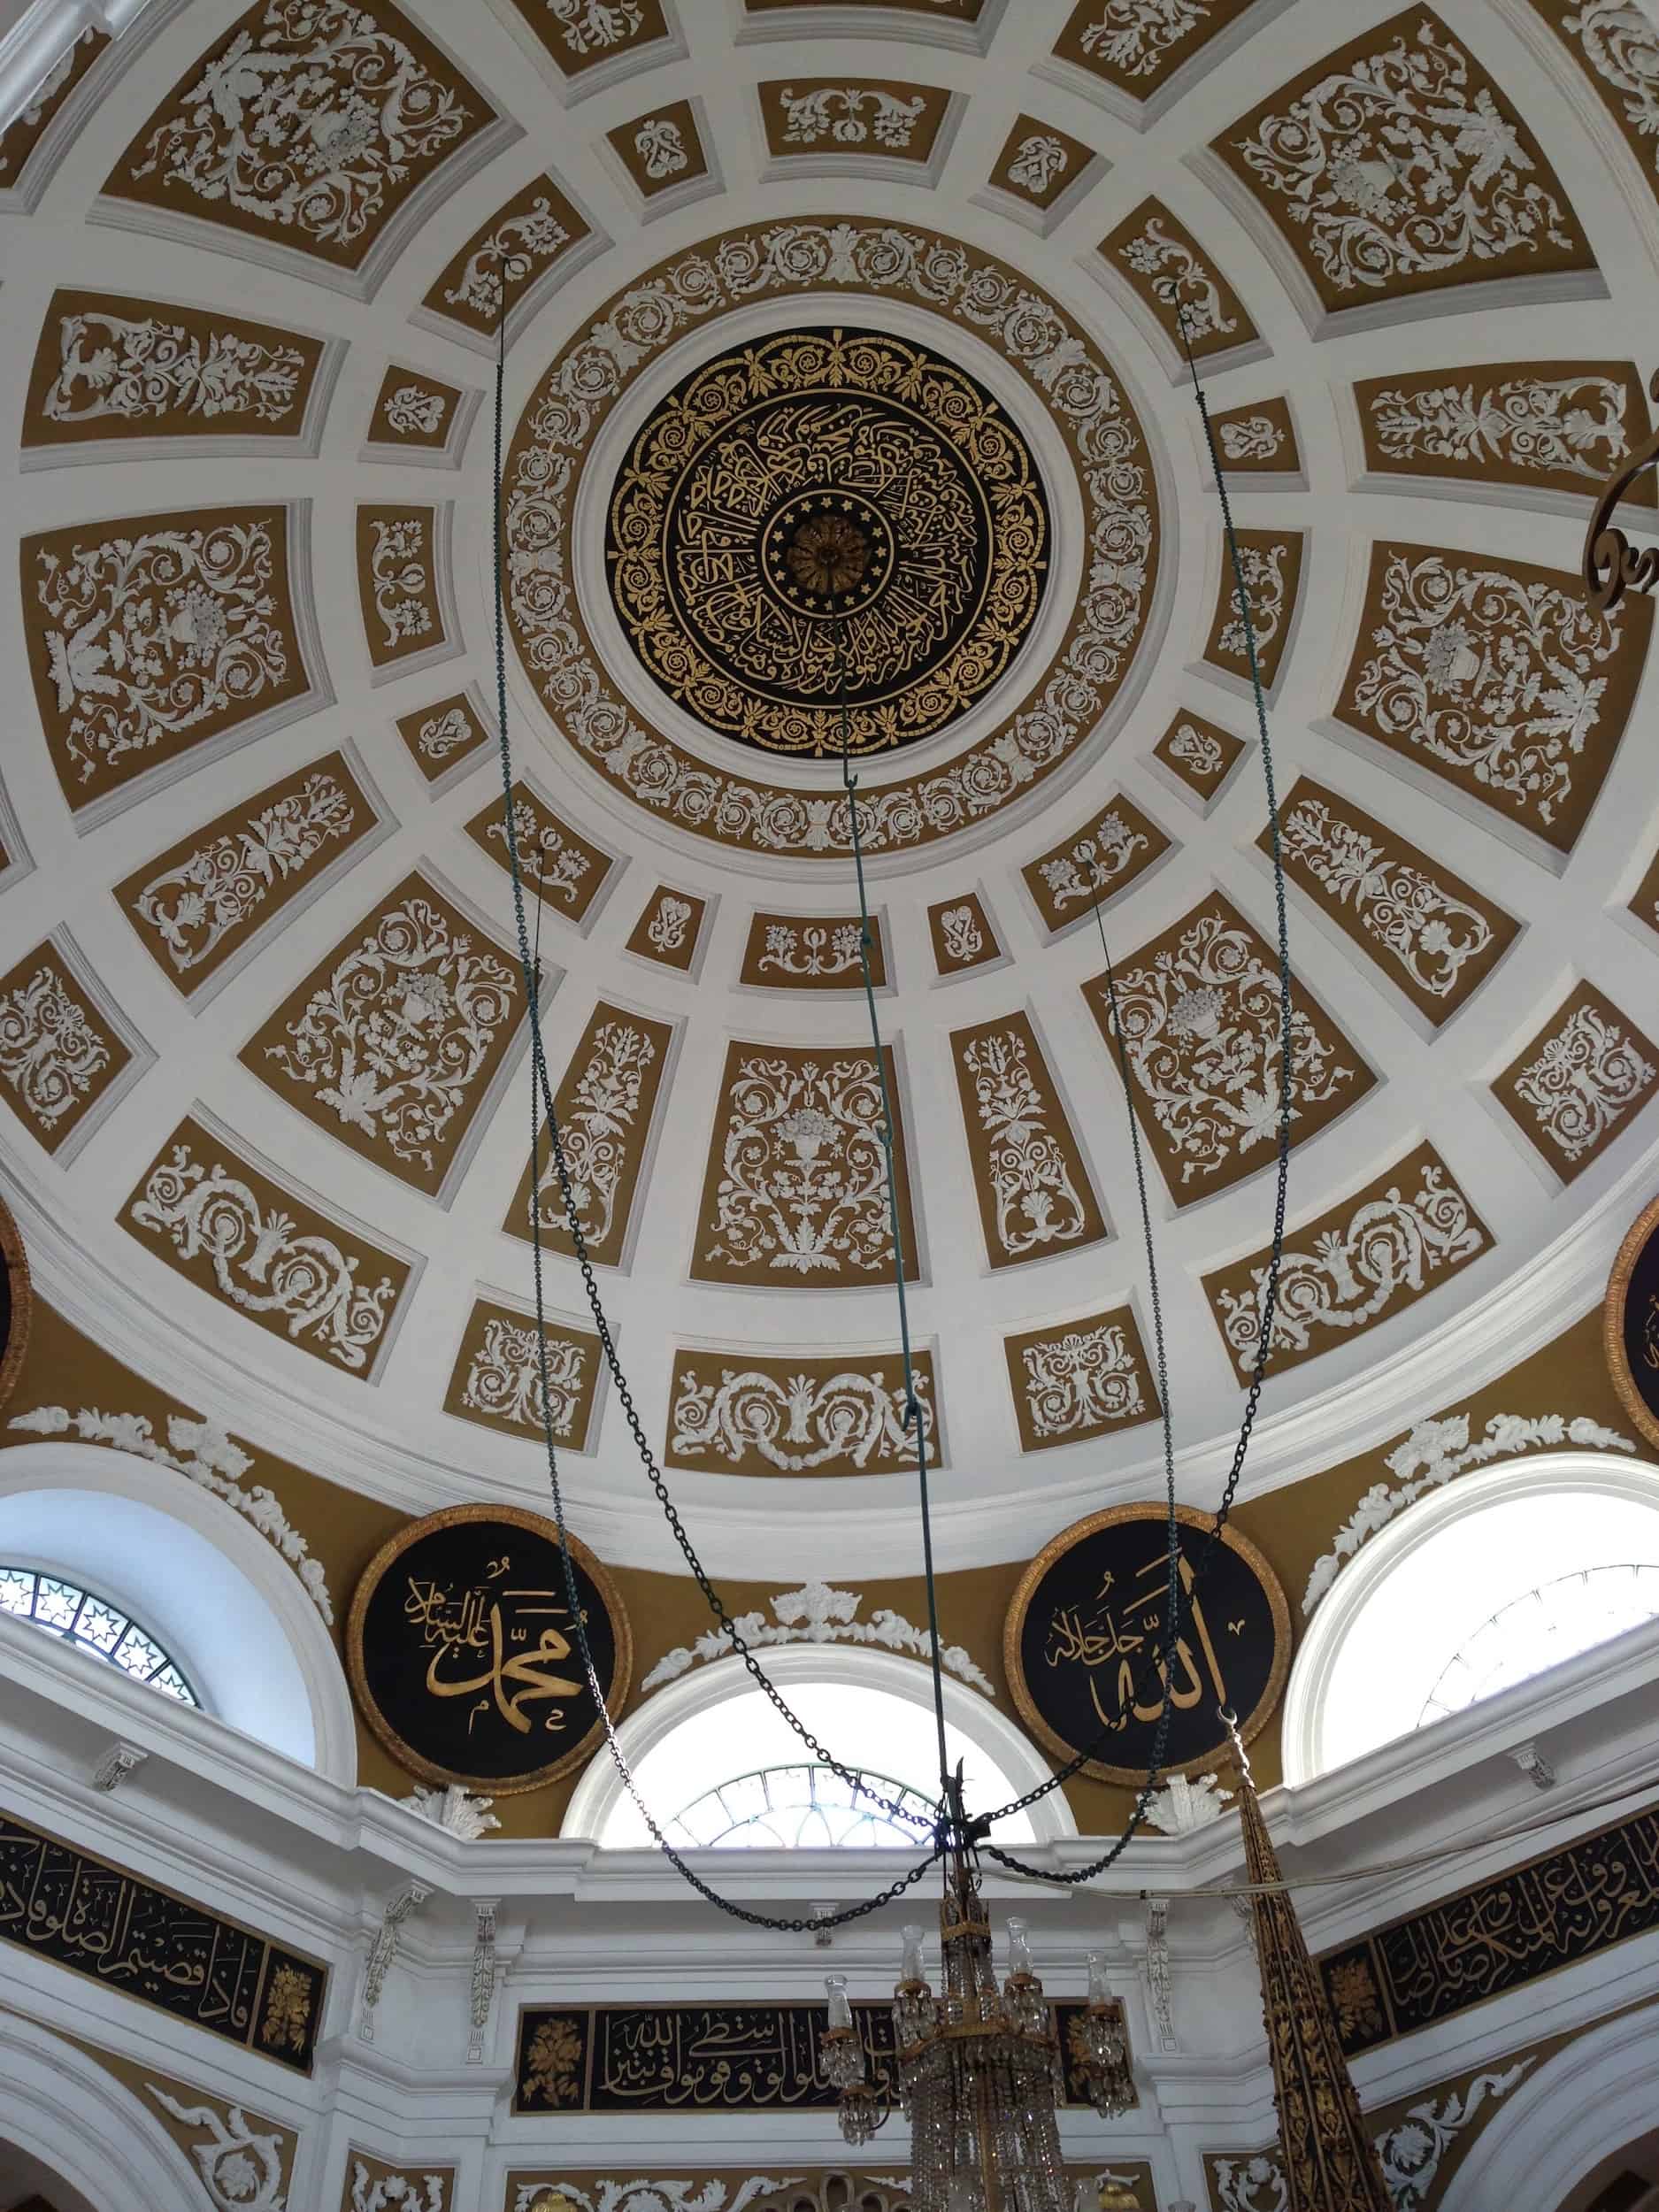 Dome of the Mosque of the Blessed Mantle in Fatih, Istanbul, Turkey